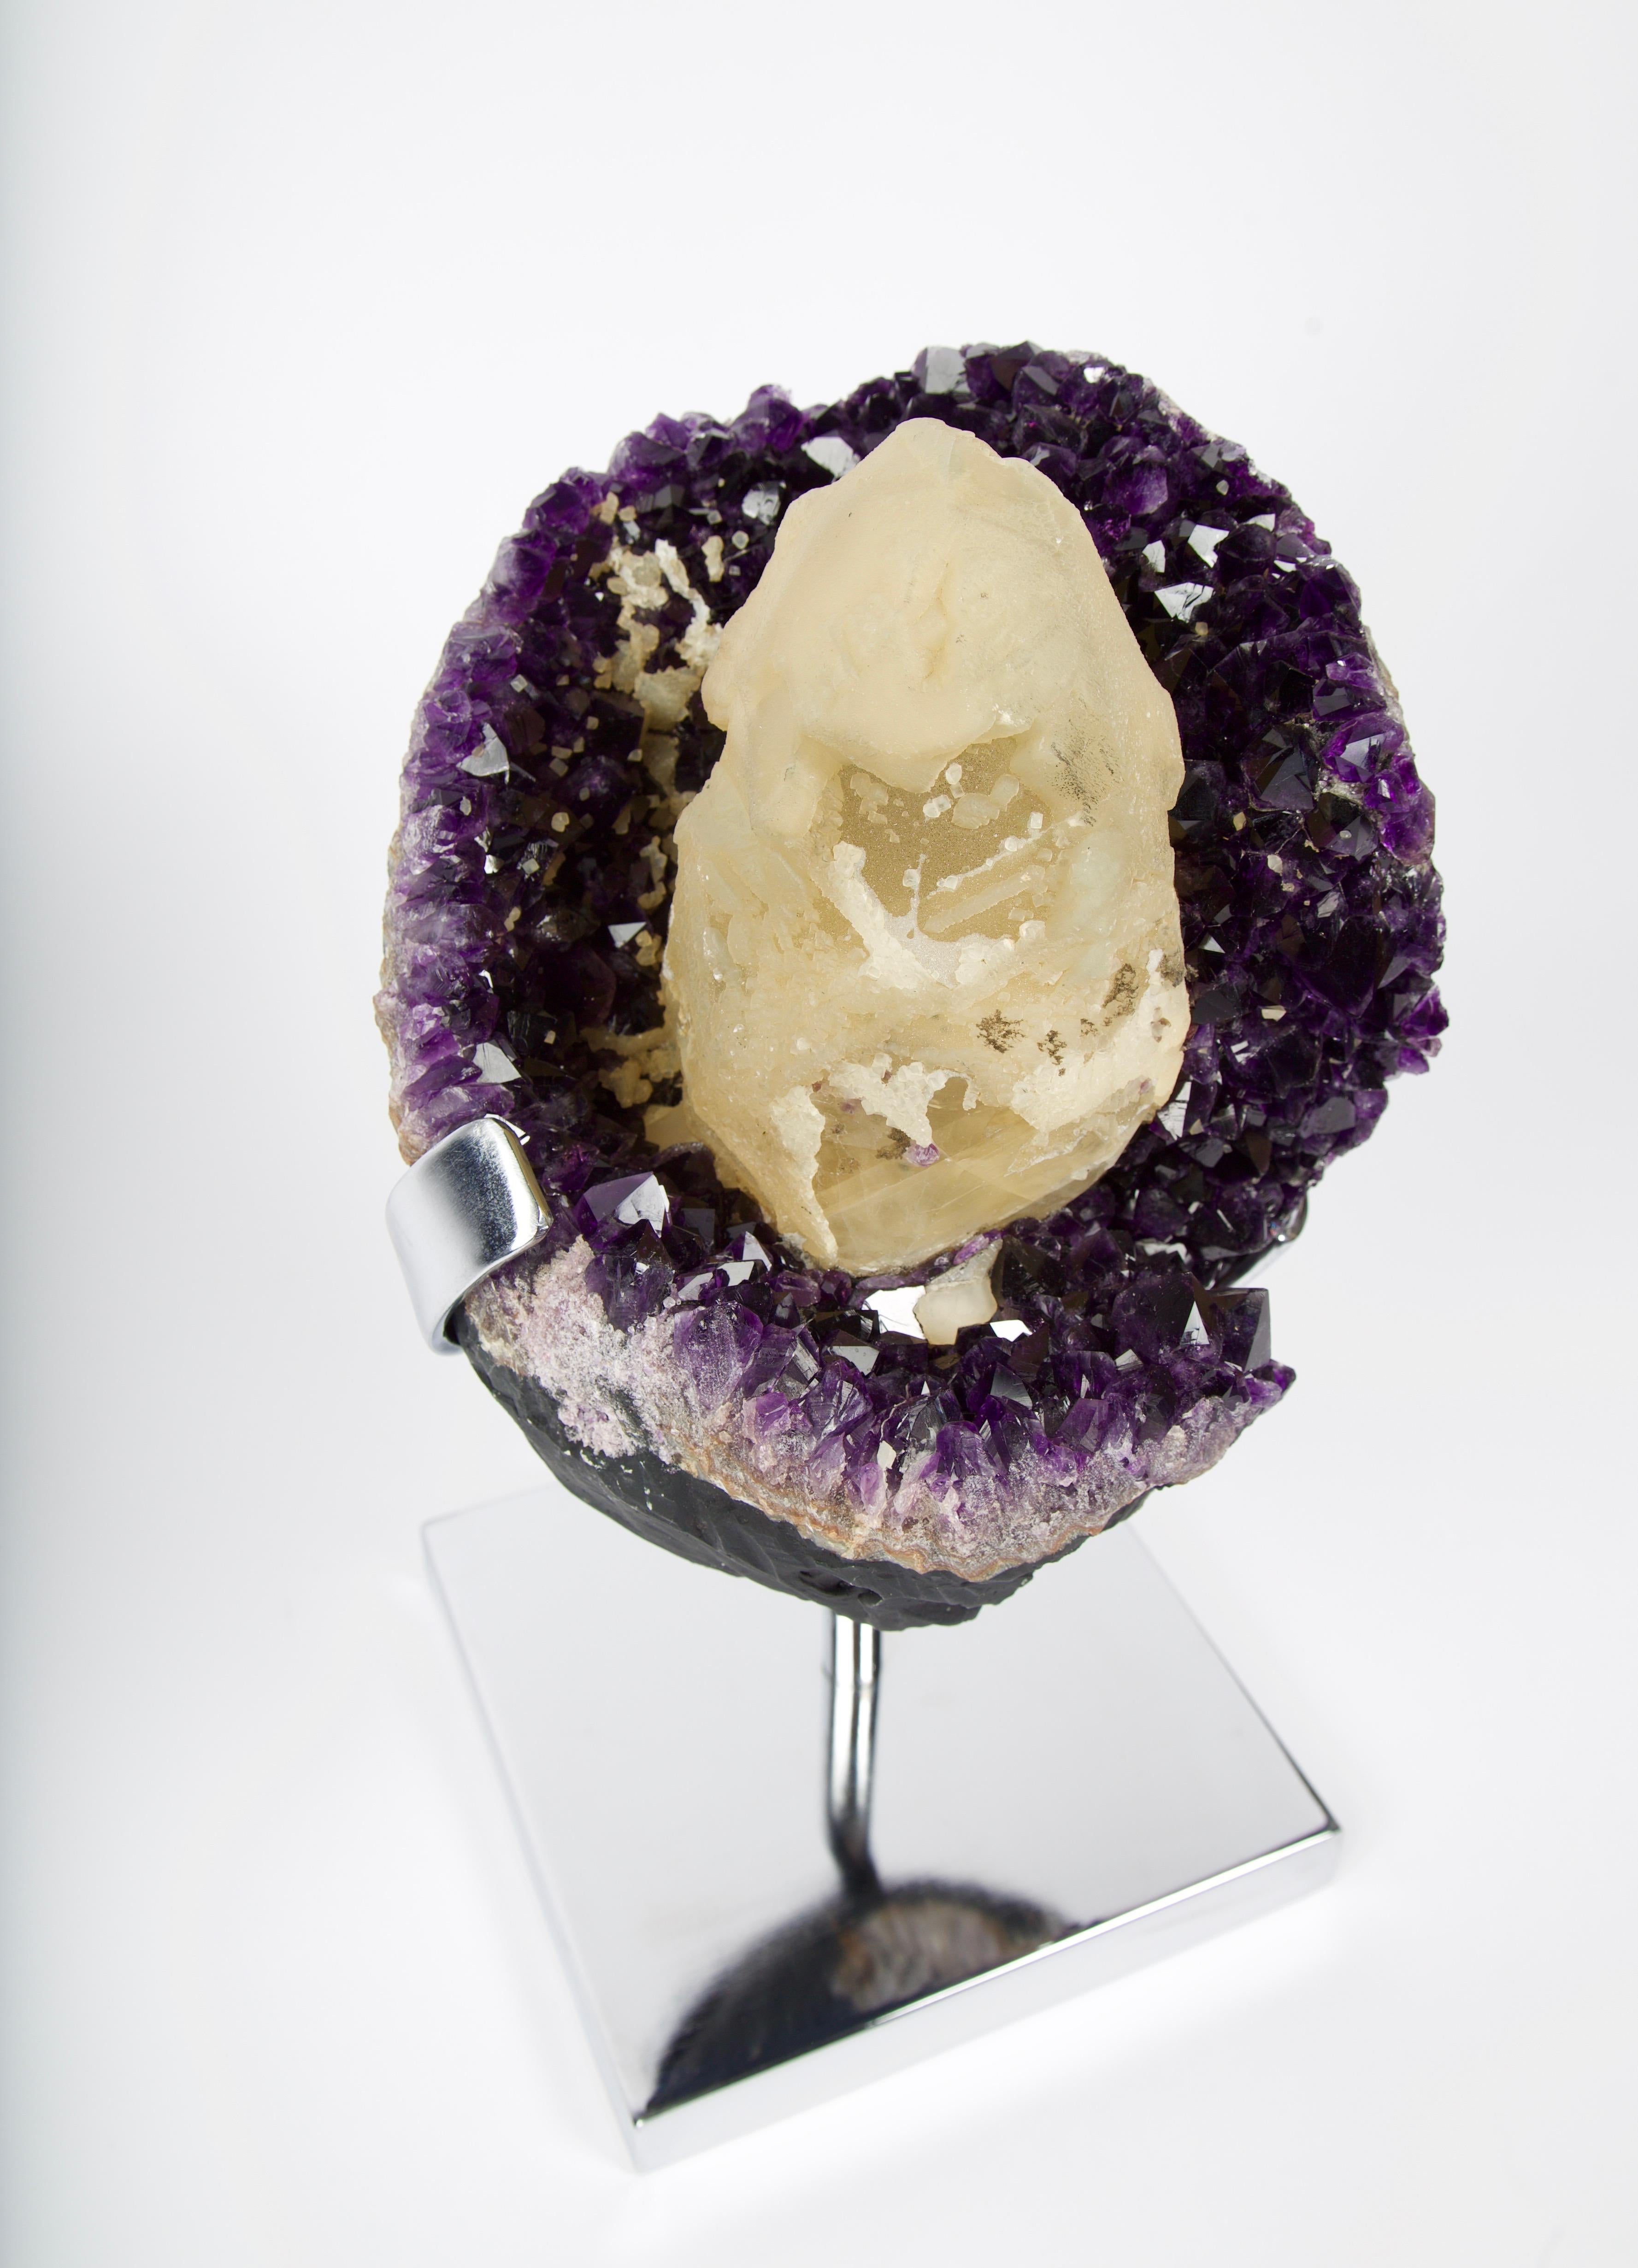 The amethyst geodes from Uruguay are mined from the same rock formation as their relatives just to the north across the border into southern Brazil and are igneous (volcanic) in origin. Uruguay amethyst, however, can usually be differentiated from